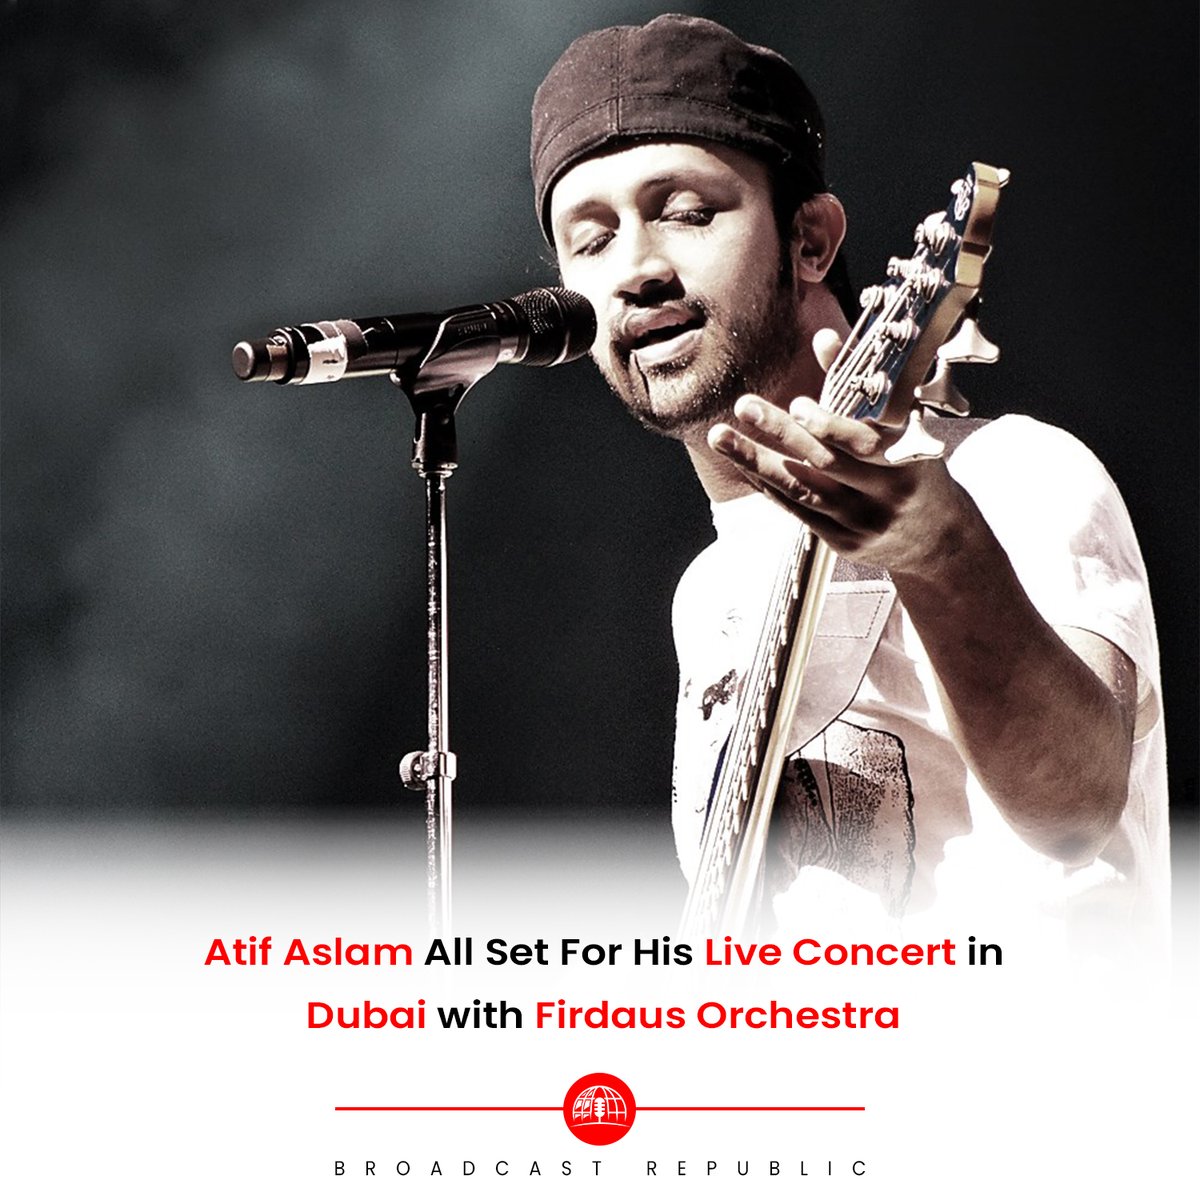 Pakistan's Atif Aslam joins the Firdaus Orchestra for a unique live performance in Dubai on March 4, 2023, at the Coca-Cola Arena. Don't miss this symphonic atmosphere of harmonious beauty! 🎶 🌟 

#BroadcastRepublic #AtifAslam #FirdausOrchestra #LiveInDubai #CocaColaArena #UAE